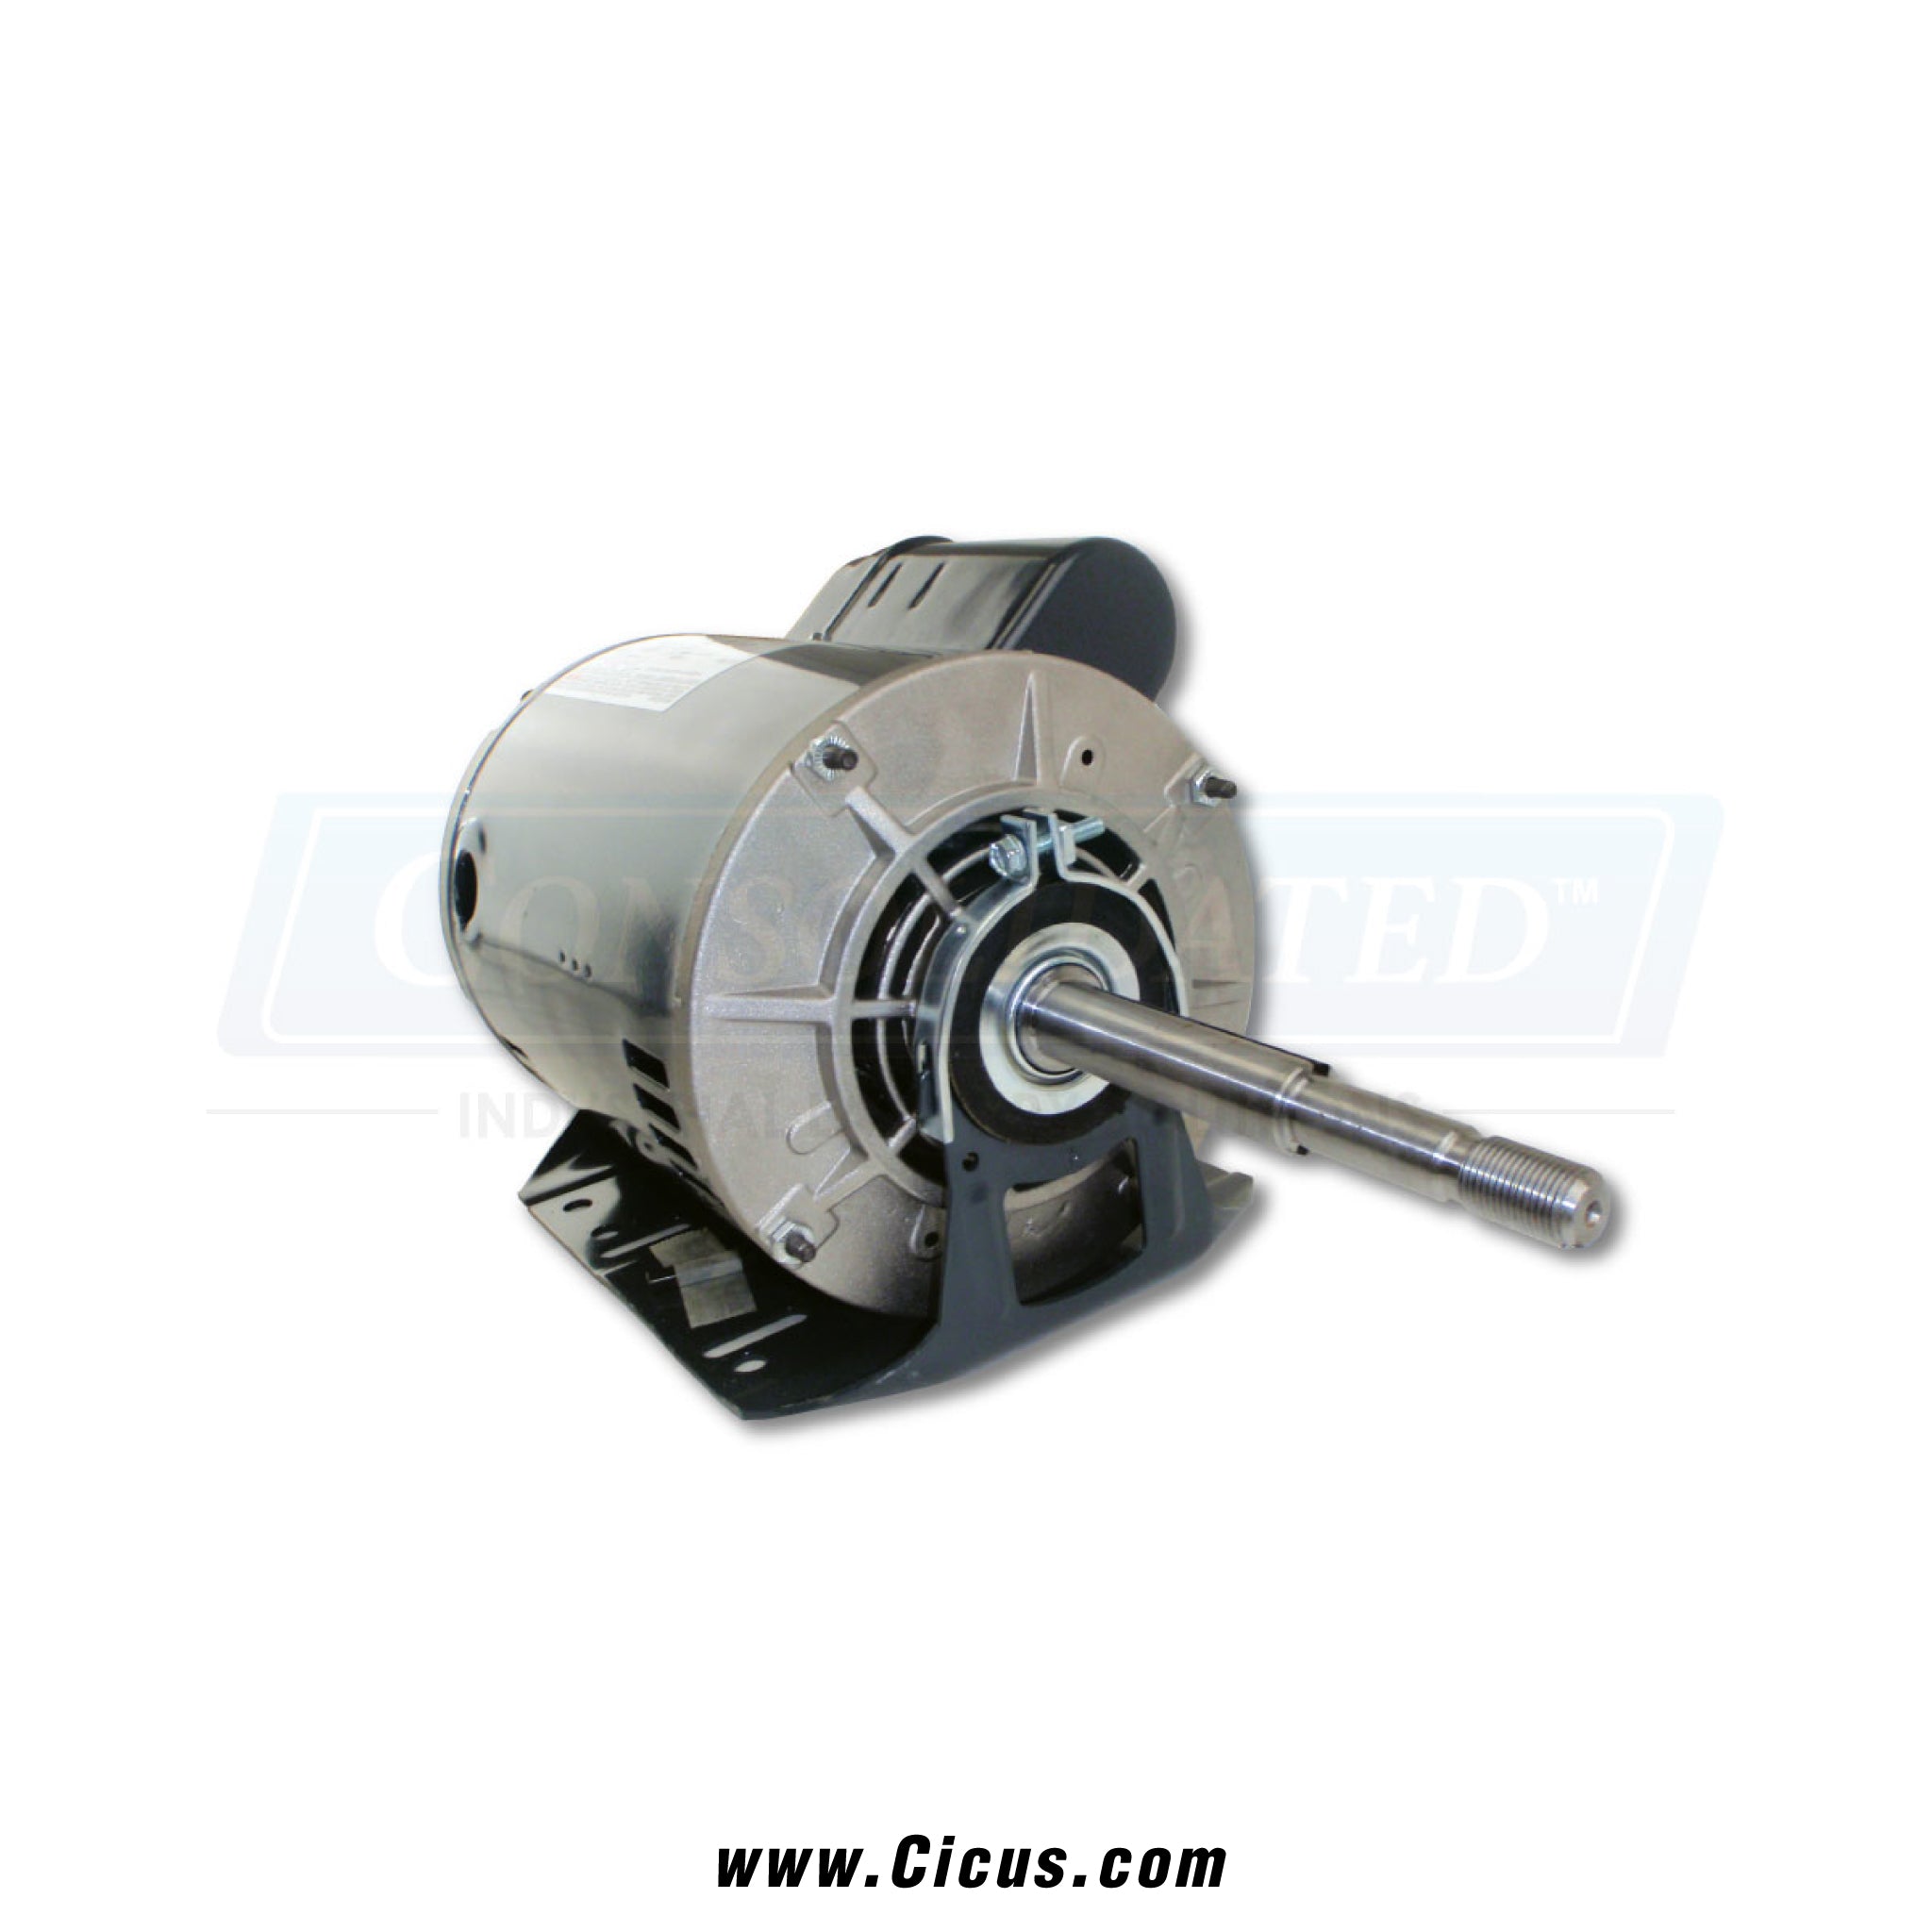 Alliance Laundry Systems 3/4 HP Type-SCS Motor for Commercial Dryers - 1725 RPM [M412227P]